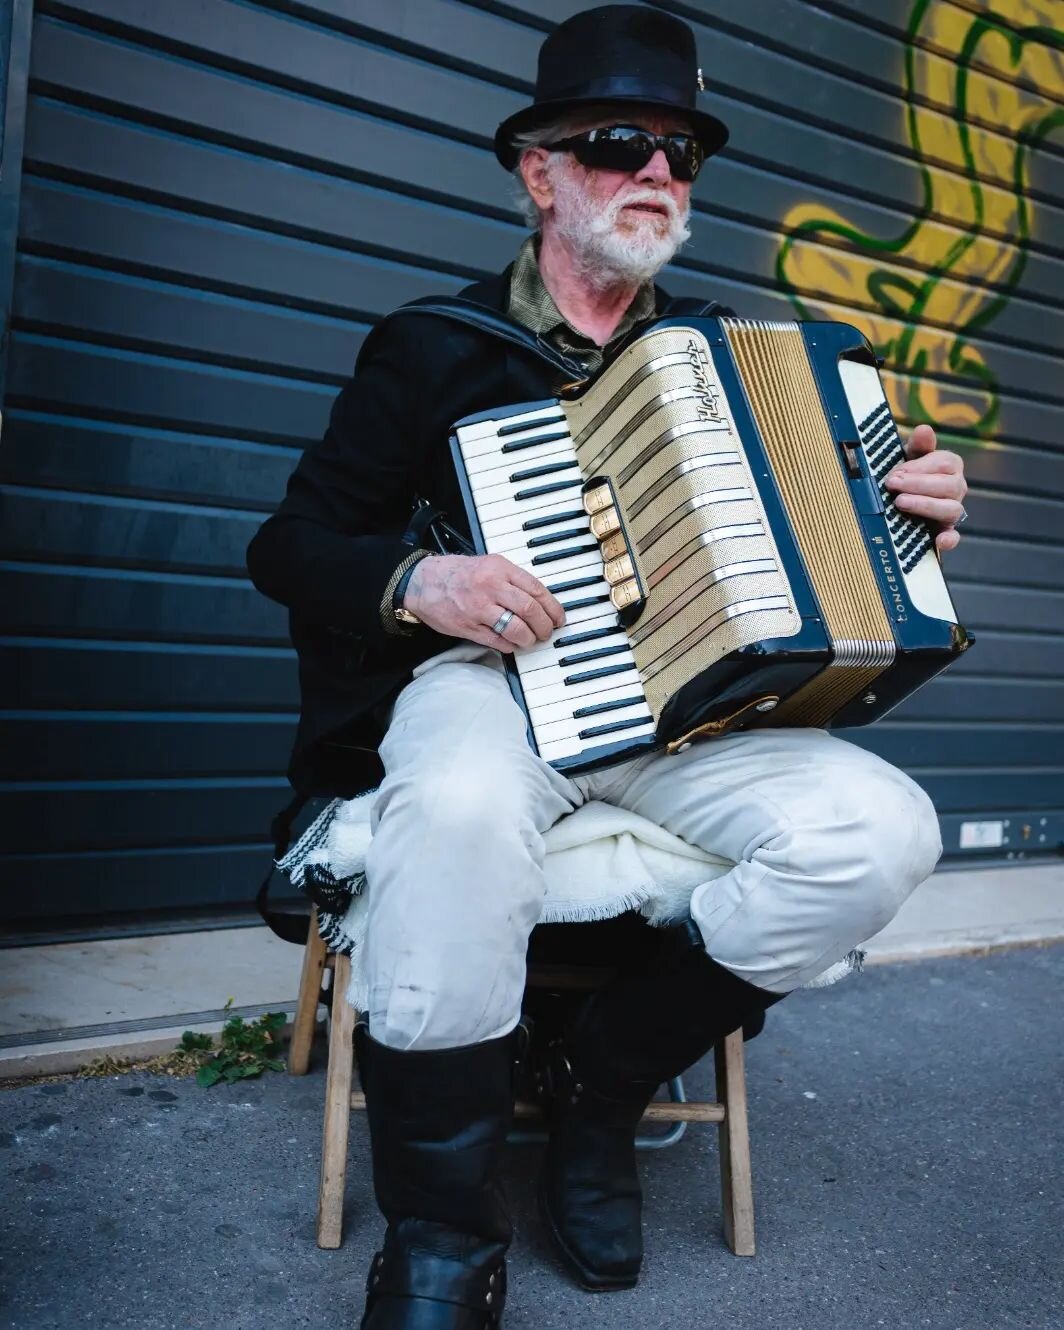 ⠀⠀⠀⠀⠀⠀⠀⠀⠀
============================
⠀⠀⠀⠀⠀⠀⠀⠀⠀
📍 2nd Arr., Paris, France 🇫🇷
⠀⠀⠀⠀⠀⠀⠀⠀
📷 Keir Gravil (@keirgravil)
⠀⠀⠀⠀⠀⠀⠀⠀⠀
📅 May 2023
⠀⠀⠀⠀⠀⠀⠀⠀⠀
============================
⠀⠀⠀⠀⠀
A street accordionist, naturally a super rare sight in Paris.
.
